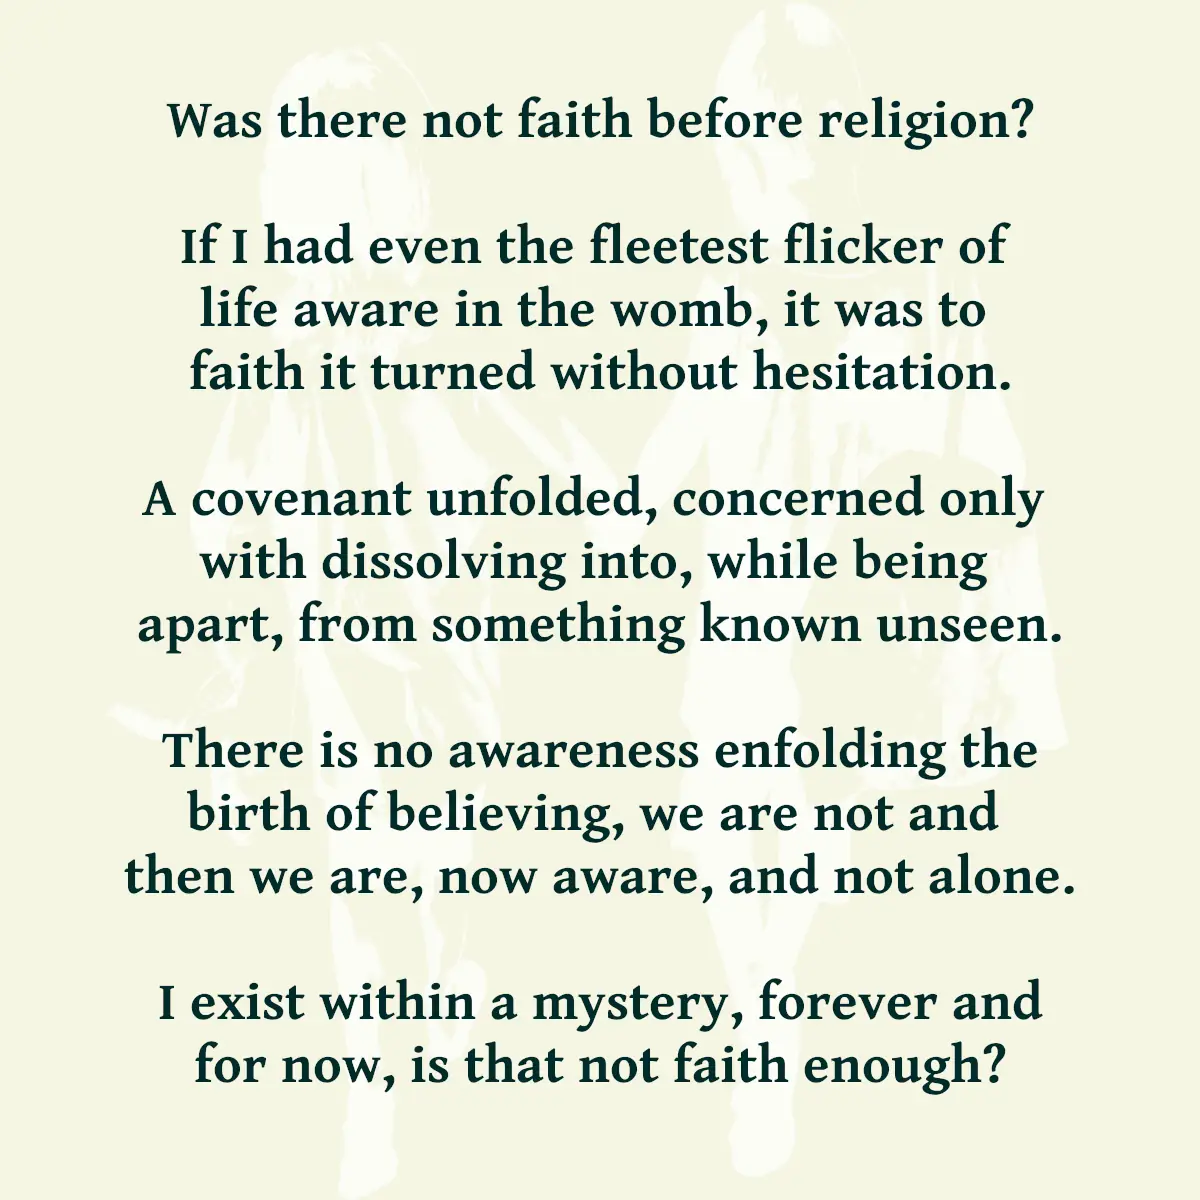 Was there not faith before religion? If I had even the fleetest flicker of life aware in the womb, it was to faith it turned without hesitation. A covenant unfolded, concerned only with dissolving into, while being apart, from something known unseen. There is no awareness enfolding the birth of believing, we are not and then we are, now aware, and not alone. I exist within a mystery, forever and for now, is that not faith enough?